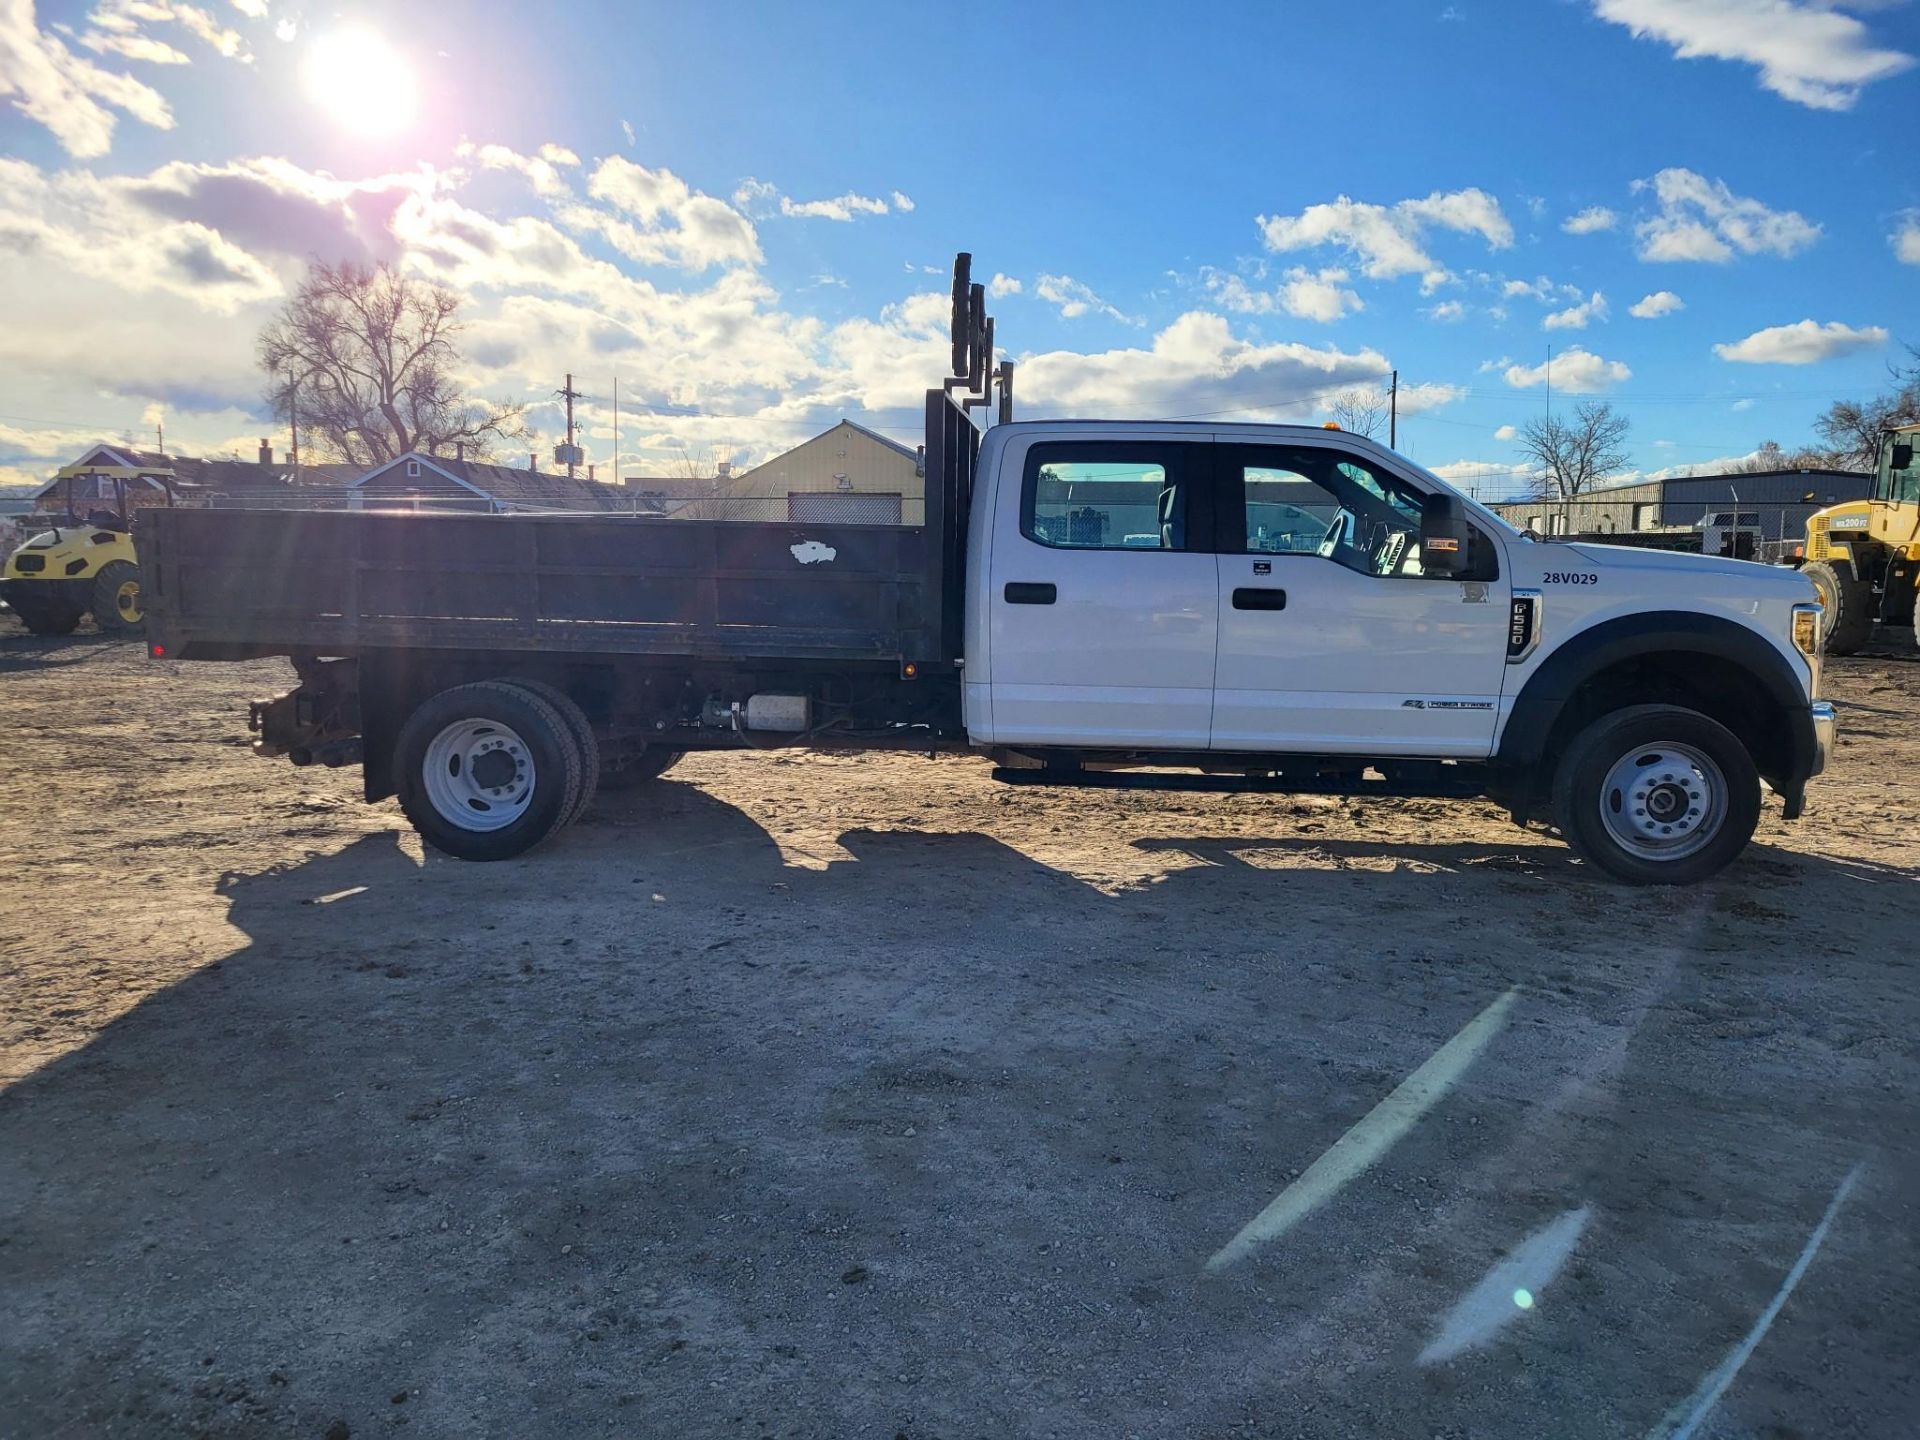 2019 FORD F550 CREW CAB DIESEL DUALLY DUMP TRUCK 31,872 MILES - Image 6 of 34